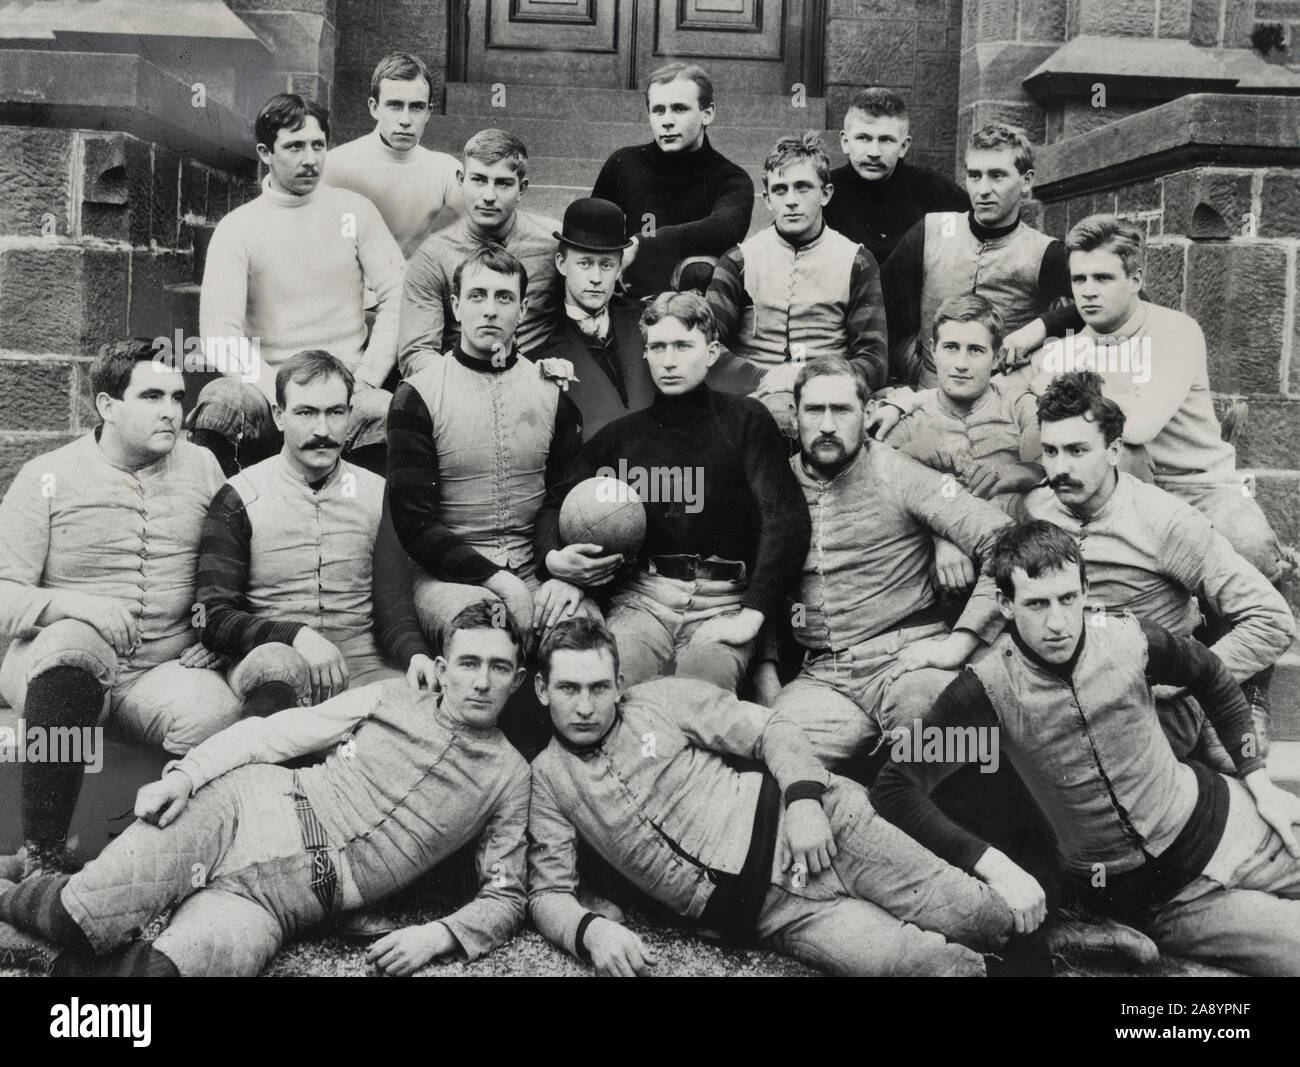 Football team - 1891 - Rutgers University - Photograph shows group portrait of the Rutger College's 1891 football team. Stock Photo